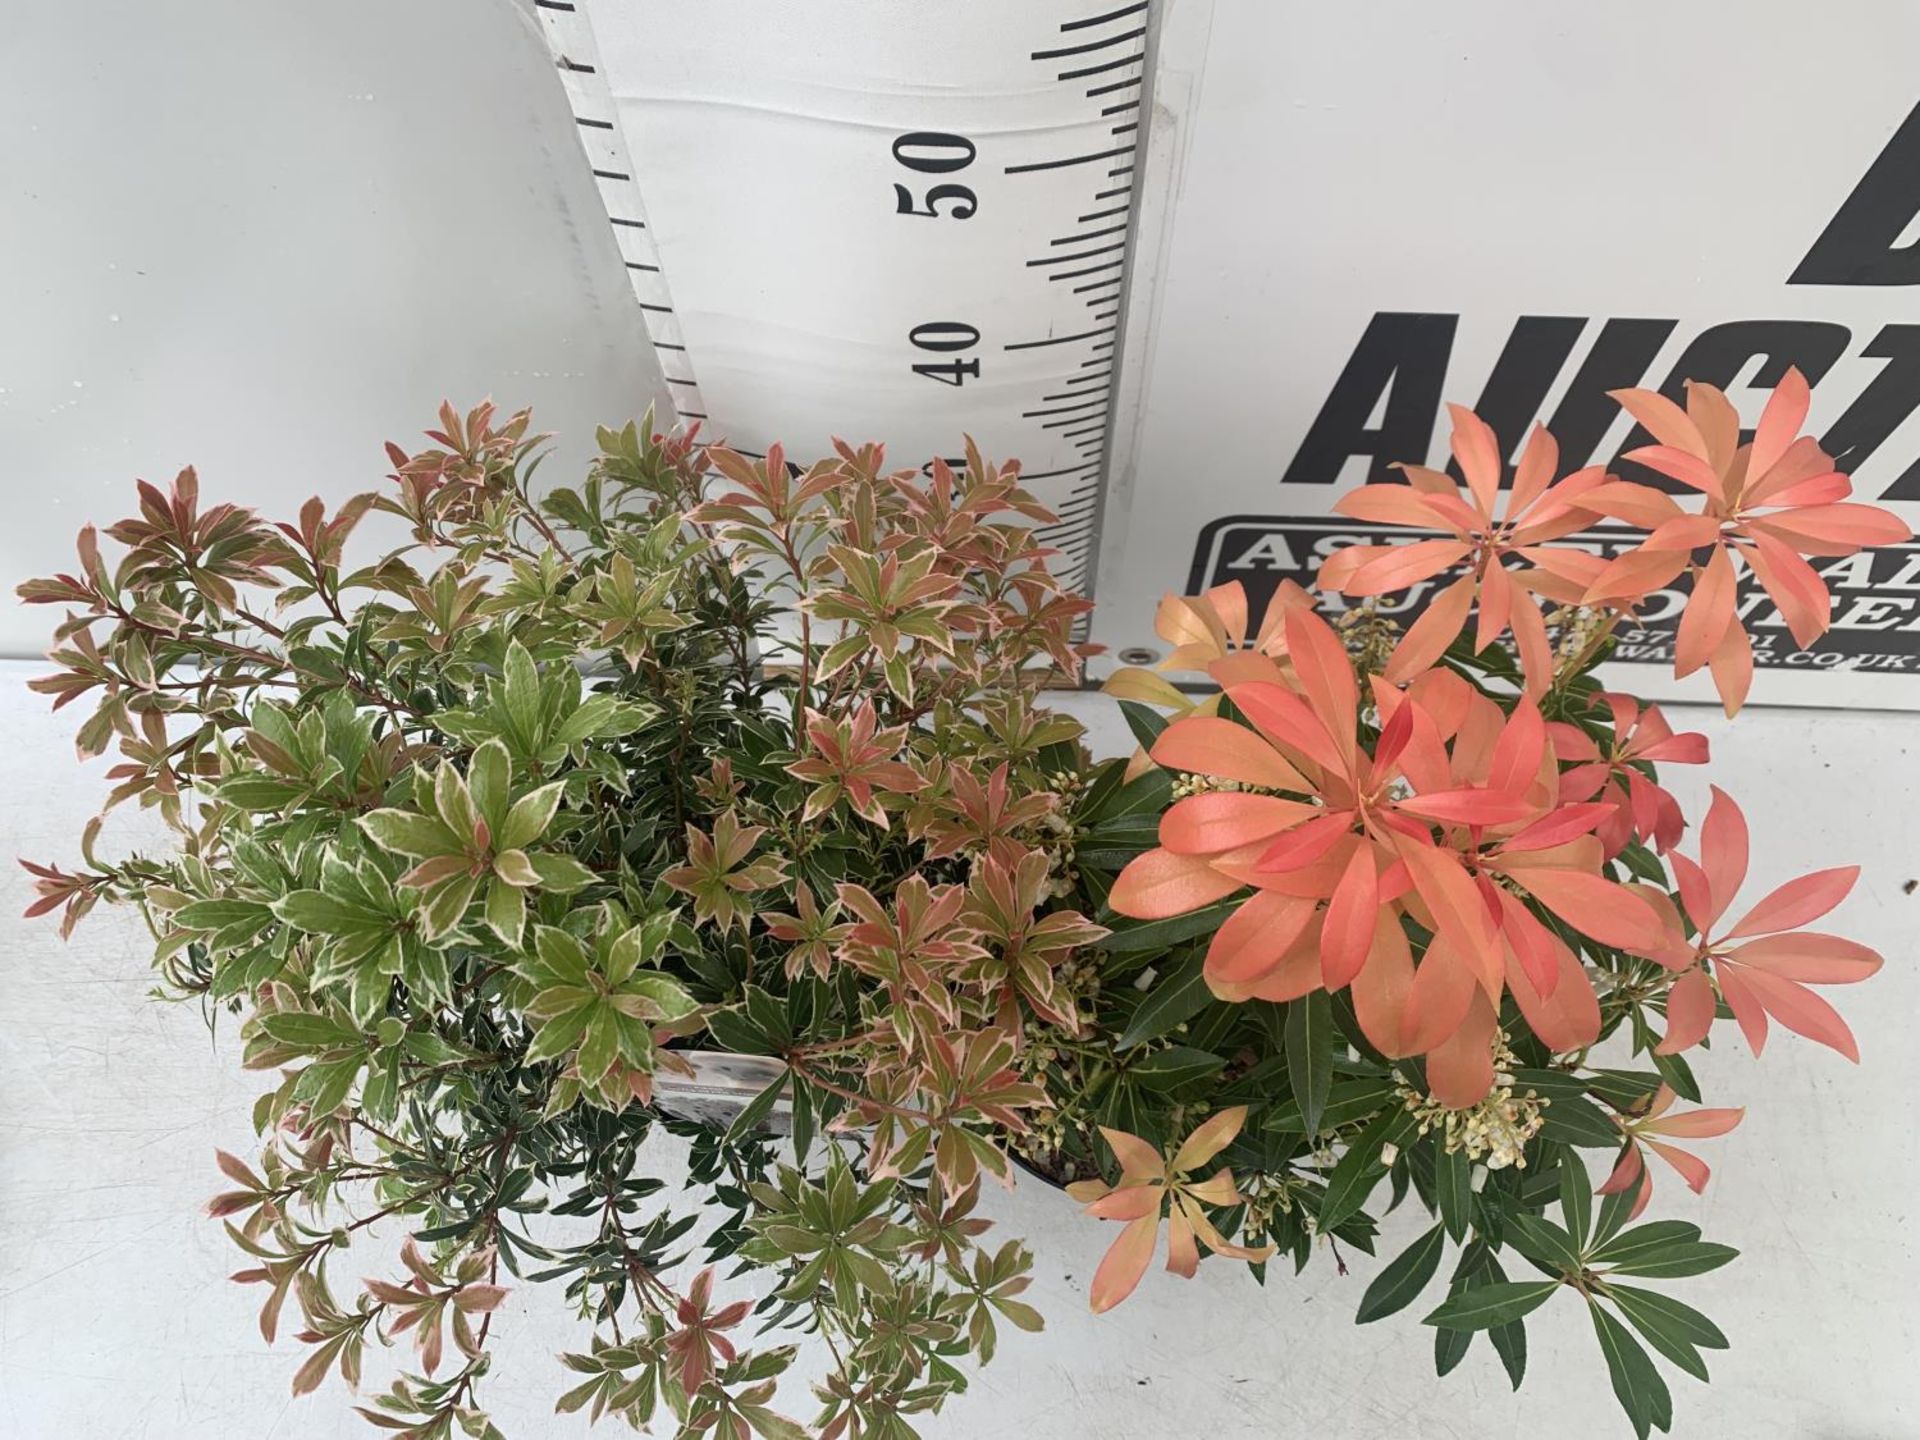 TWO PIERIS JAPONICA 'LITTLE HEATH' AND 'FOREST FLAME' IN 3 LTR POTS 55CM TALL PLUS VAT TO BE SOLD - Image 2 of 6